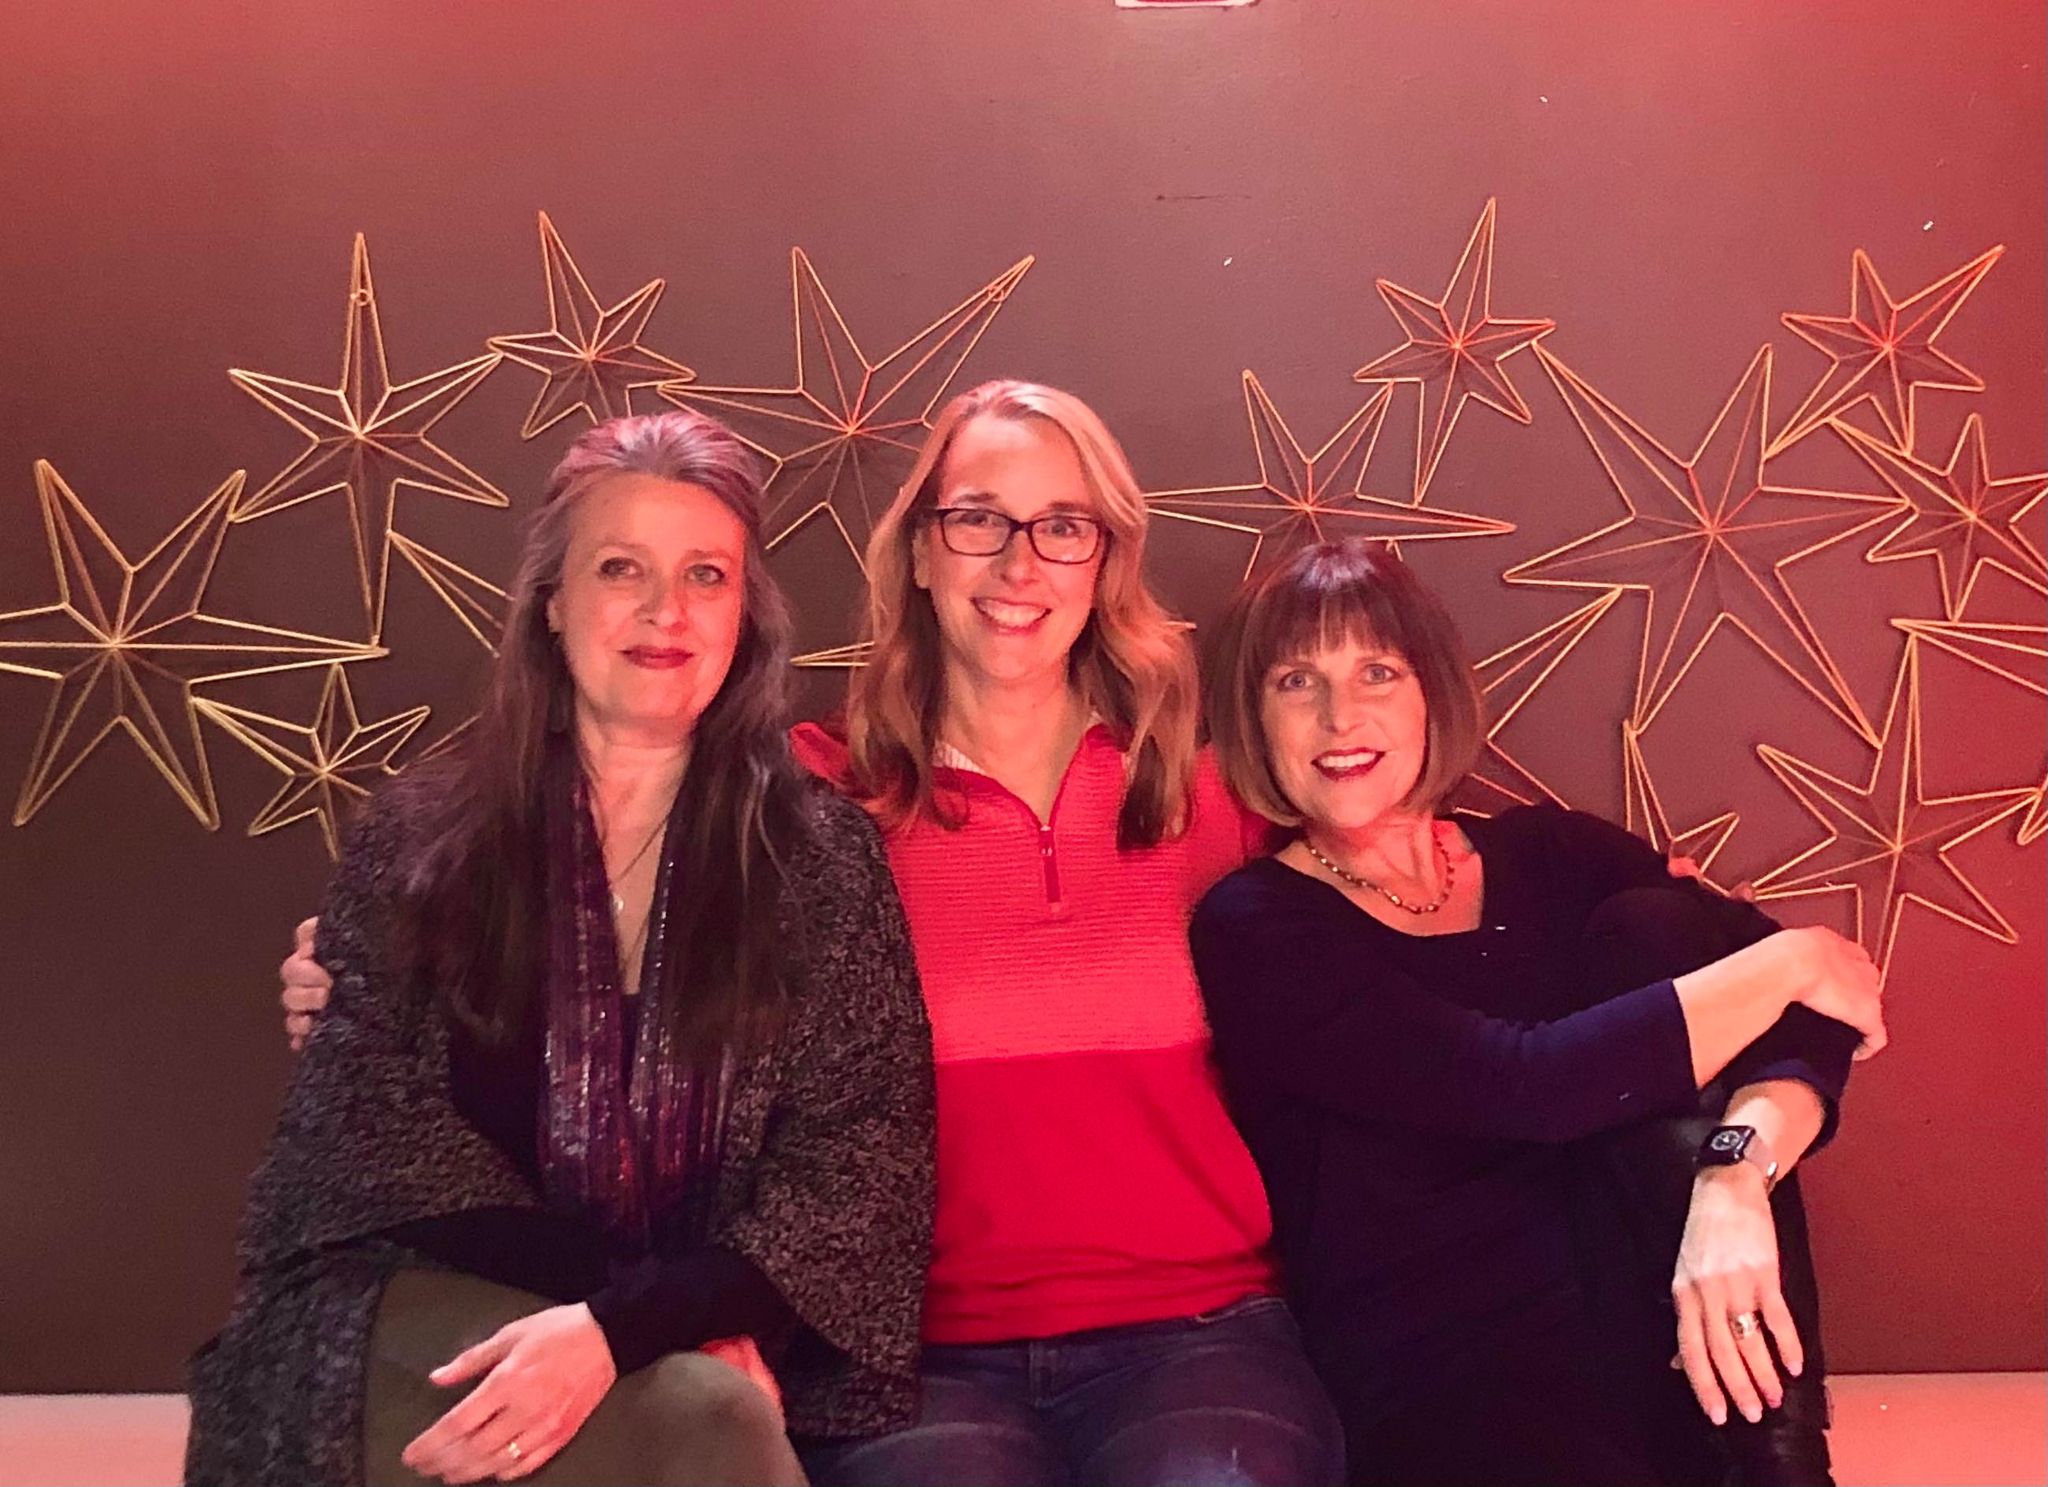 Left to right:  Dance alumni board members Cary Twomey, Kari Swanson Neth and Shelley Brackhan Fritz welcome dance alumni to attend a get together on Dec. 3 at Barrymore’s following the Dec. 3 Student Dance Project performance.